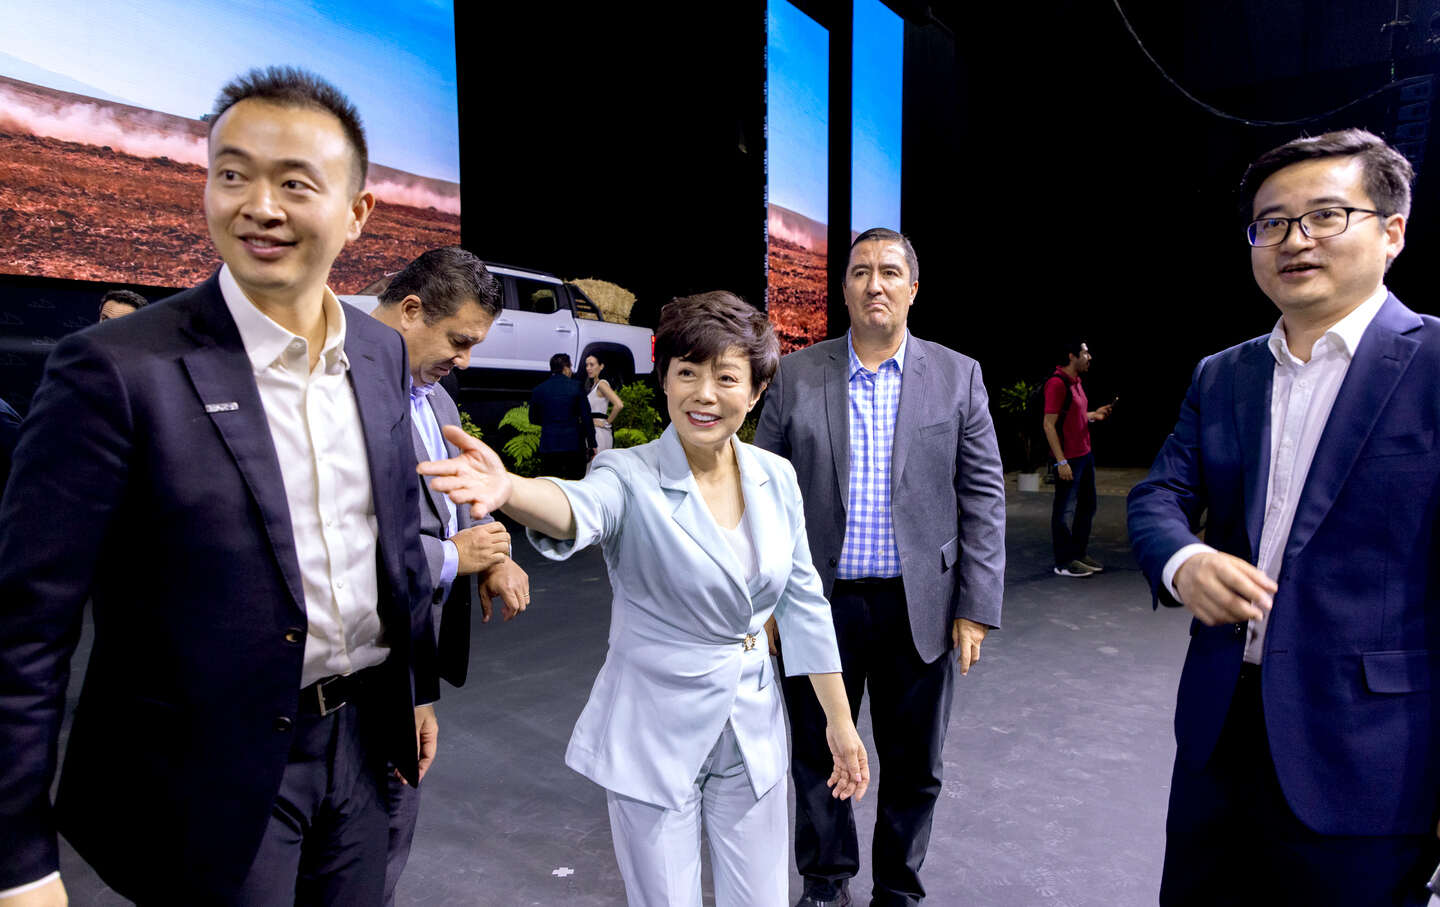 Stella Li, vice president of BYD, during the launch event of the BYD Shark plug-in hybrid electric vehicle in Mexico City, Mexico, on May 14, 2024.